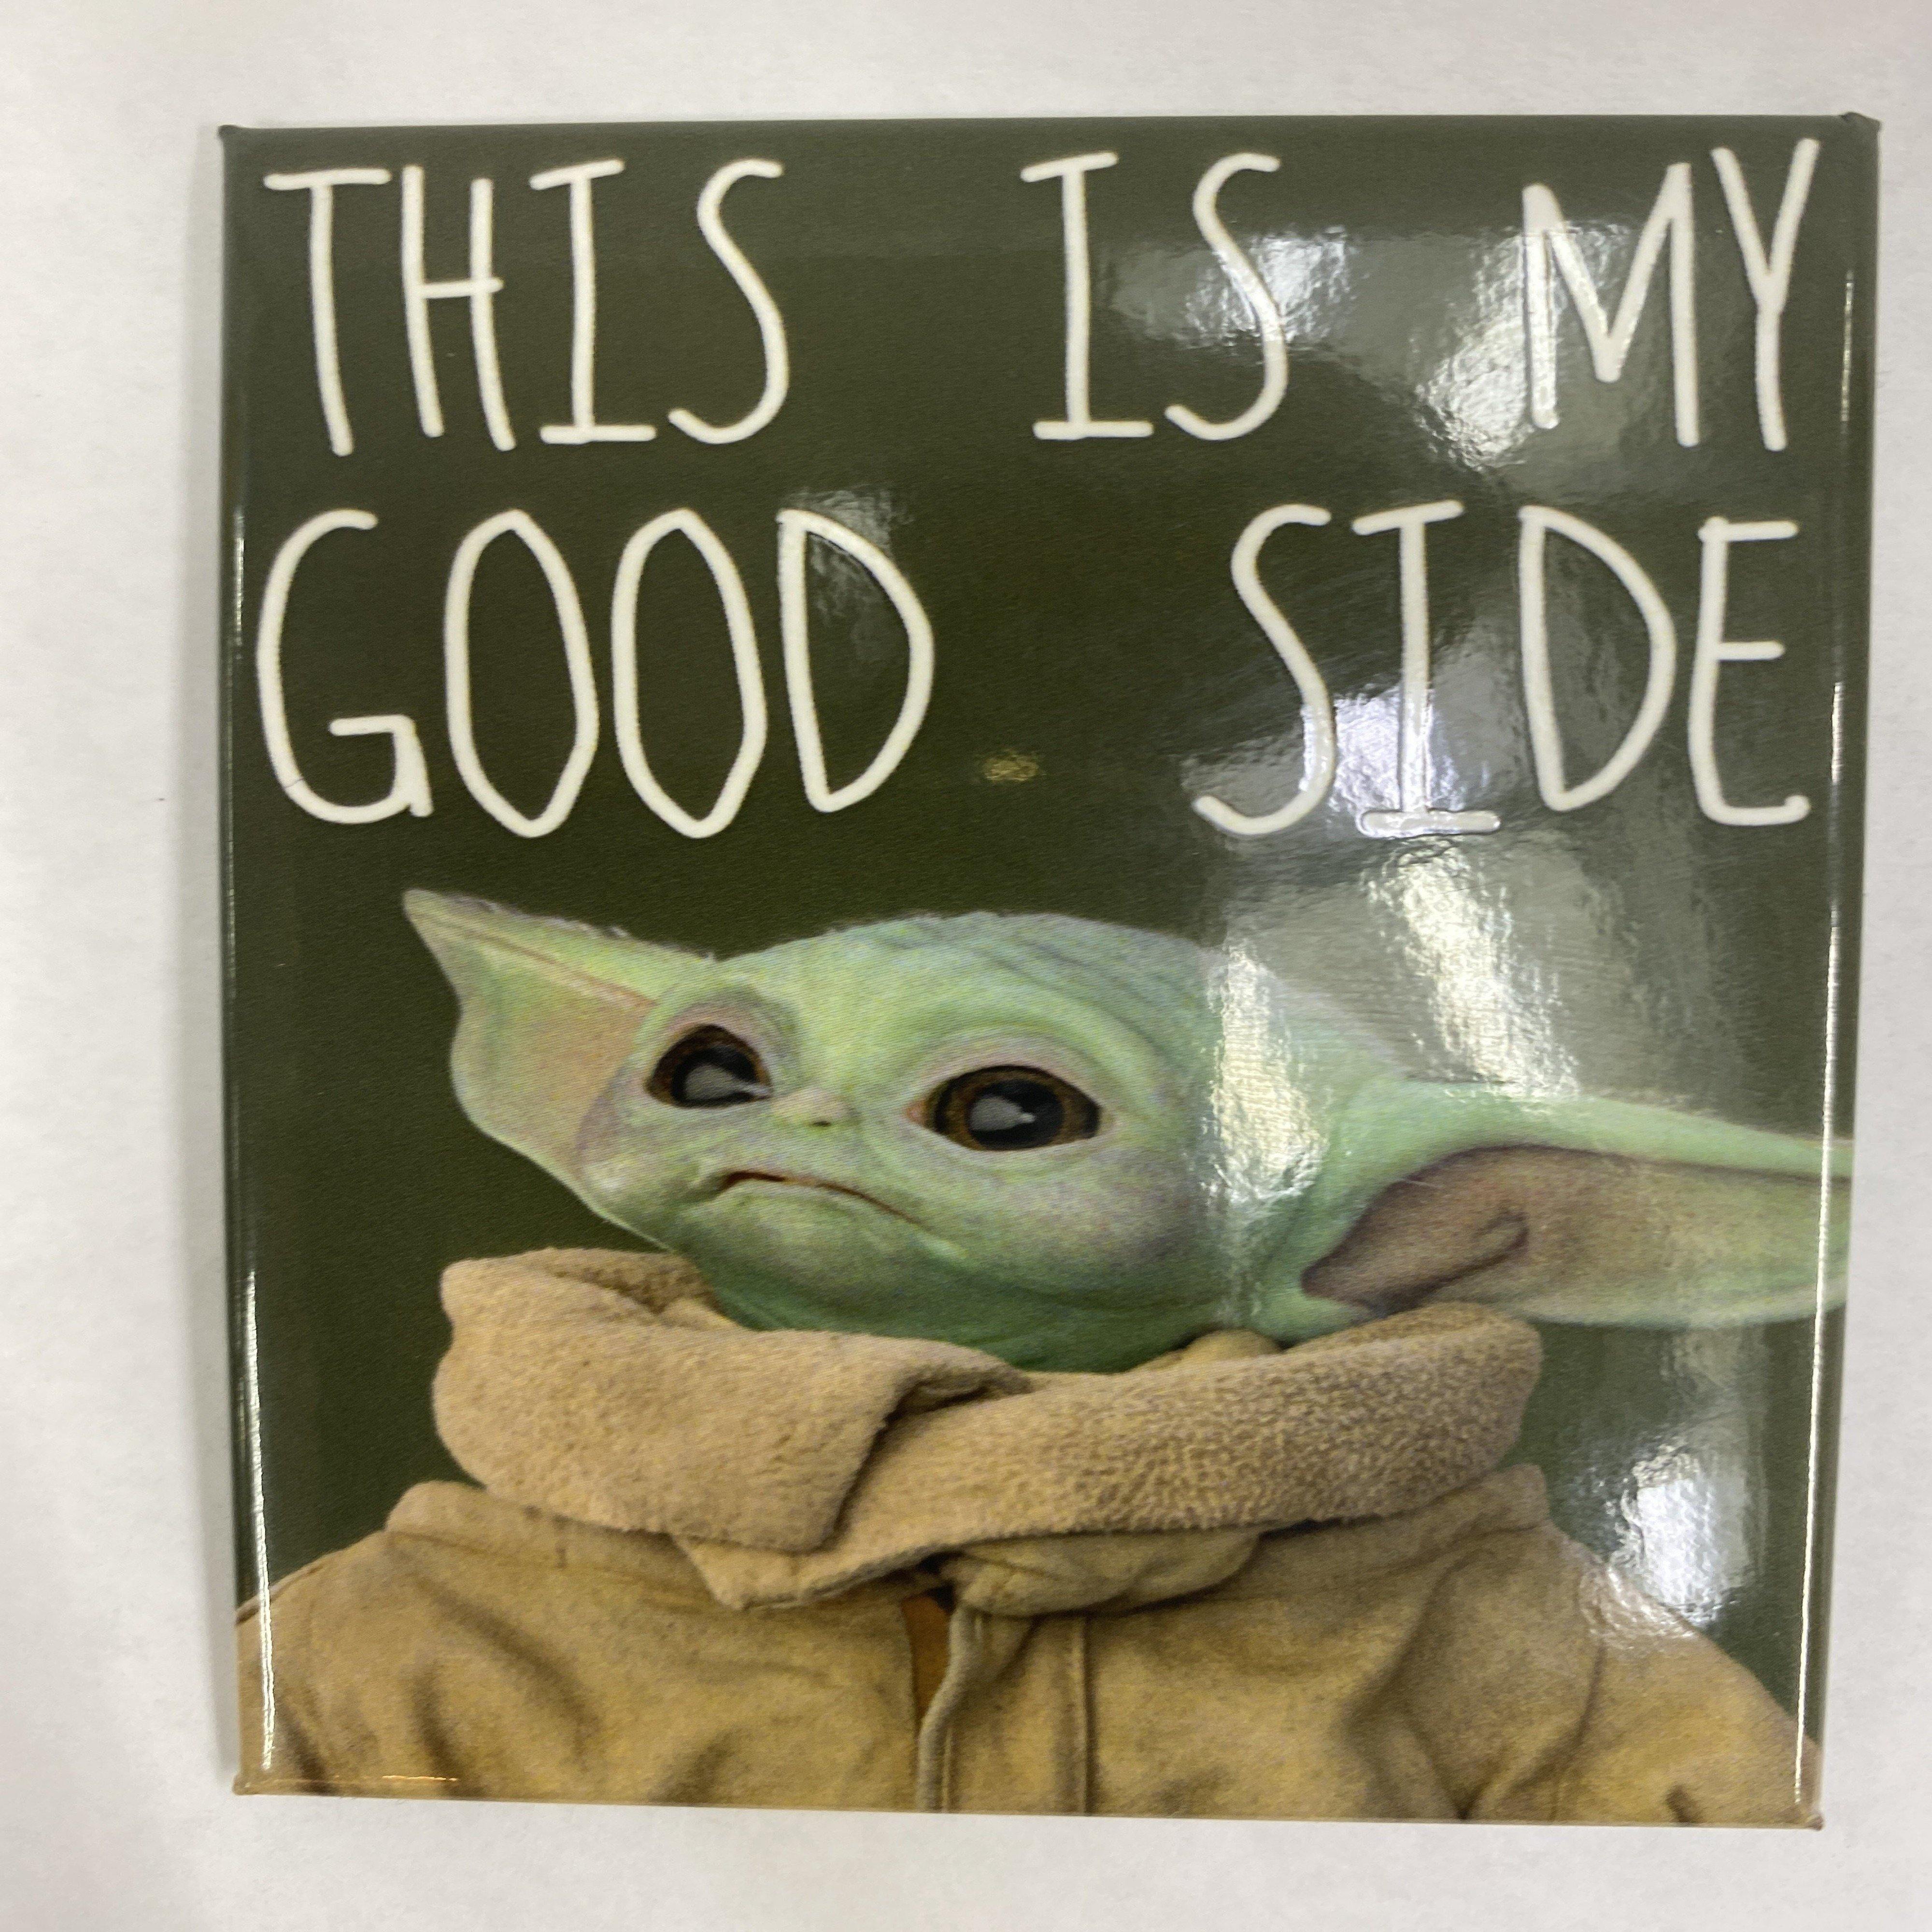 Star Wars The Mandalorian The Child Baby Yoda Magnet- This is my good side